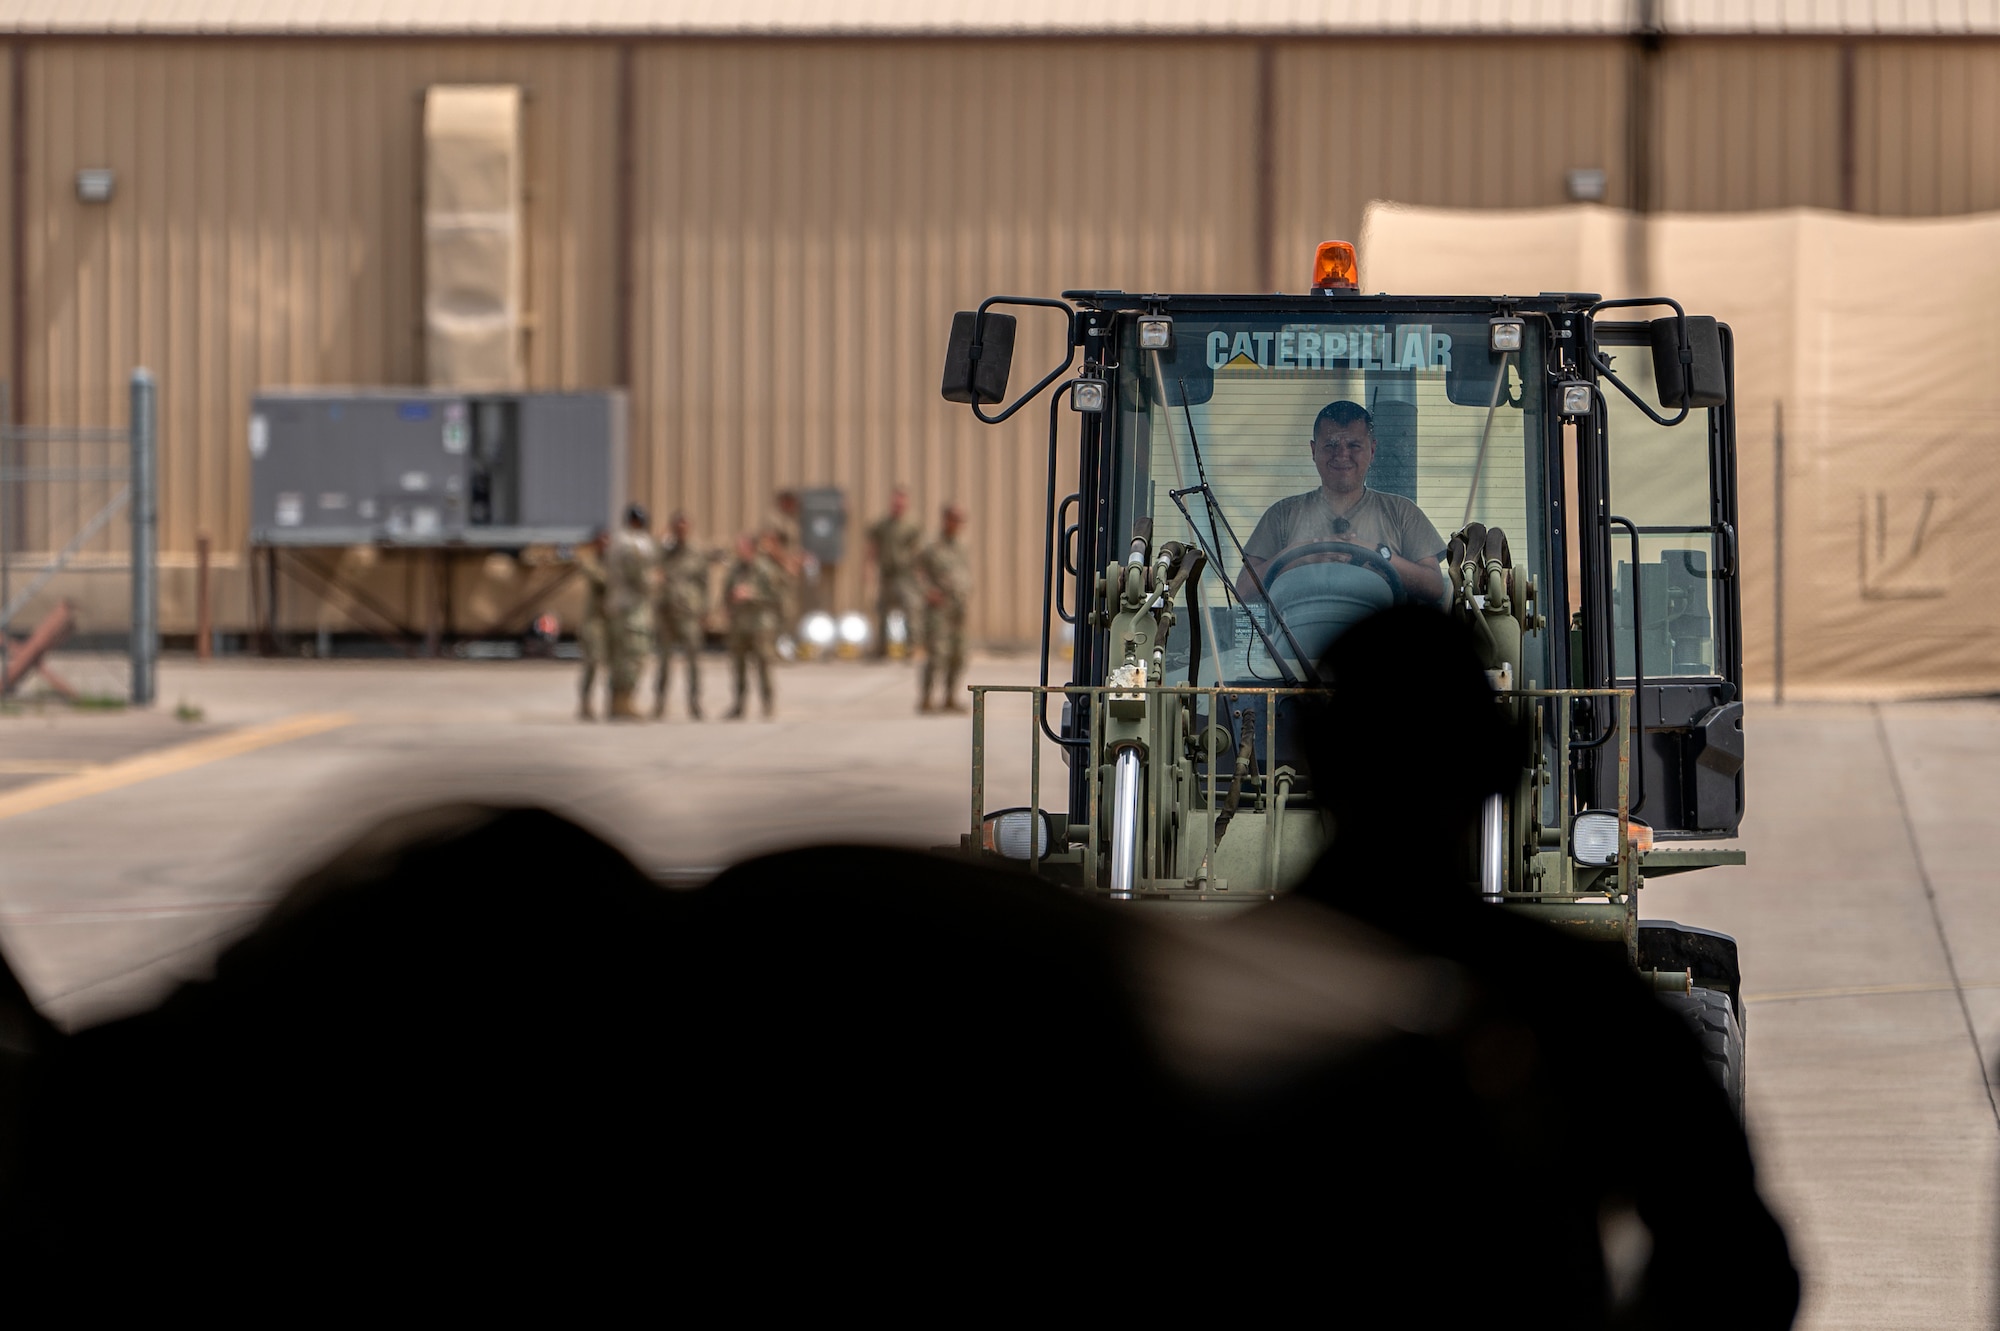 A U.S. Air Force Airman assigned to Holloman Air Force Base, New Mexico, operates a forklift to download luggage from an HC-130J Combat King II aircraft on the flightline at Holloman AFB, Aug. 29, 2021. The 71st Rescue Squadron transported 822nd Base Defense Squadron Airmen from Moody Air Force Base, Georgia, to Holloman AFB in support of Task Force – Holloman. The Department of Defense, through U.S. Northern Command, and in support of the Department of Homeland Security, is providing transportation, temporary housing, medical screening, and general support for at least 50,000 Afghan evacuees at suitable facilities, in permanent or temporary structures, as quickly as possible. This initiative provides Afghan personnel essential support at secure locations outside Afghanistan. (U.S. Air Force photo by Staff Sgt. Devin Boyer)